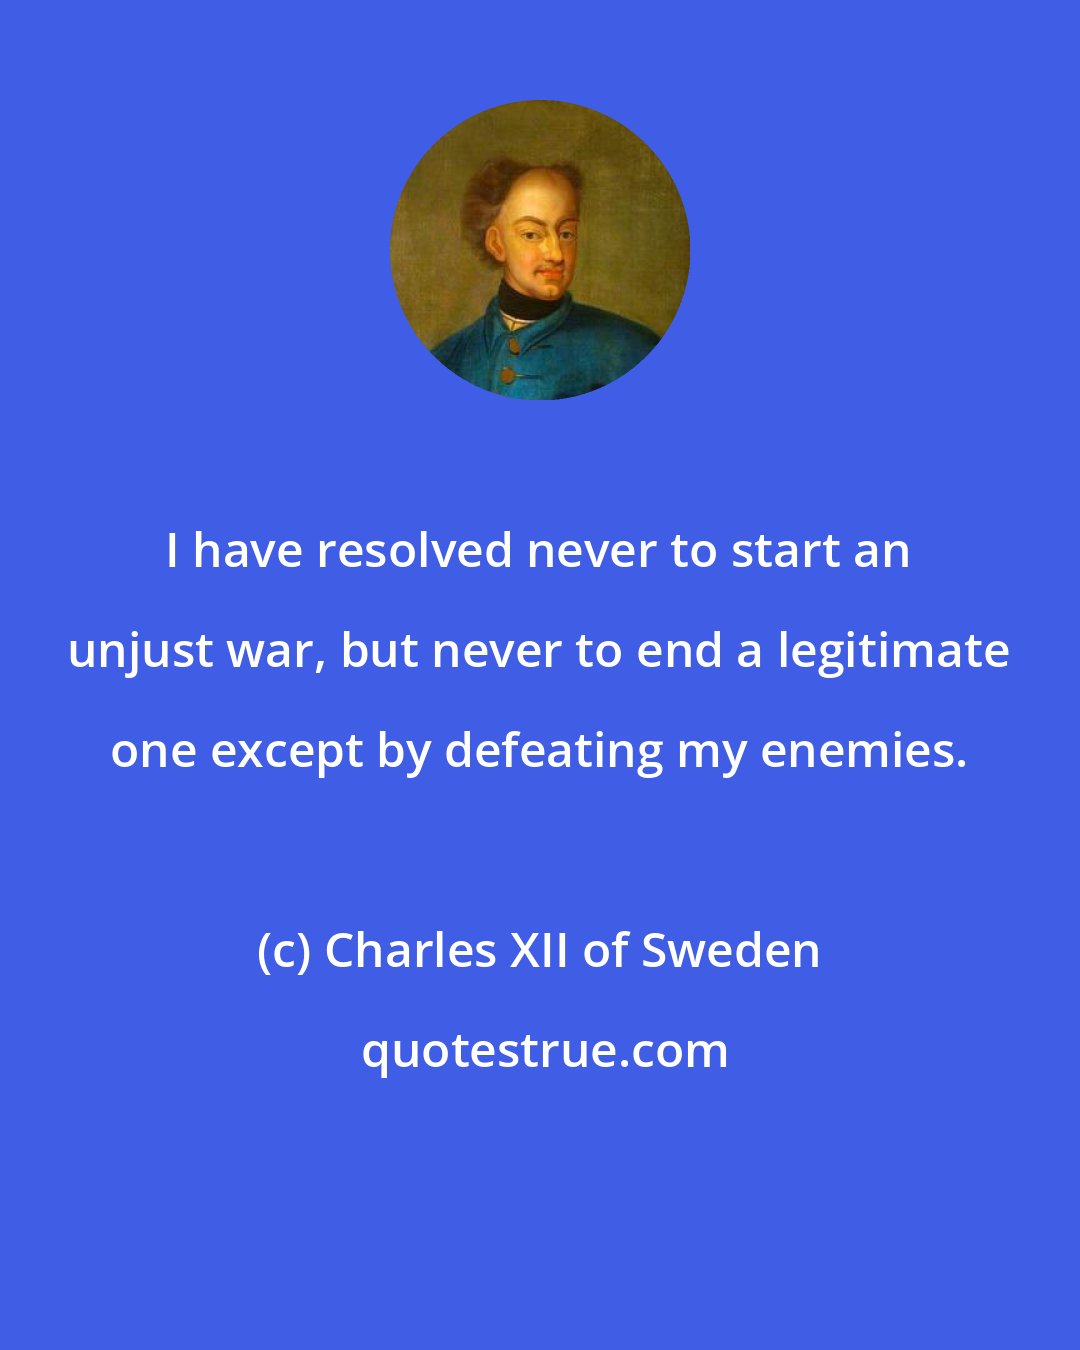 Charles XII of Sweden: I have resolved never to start an unjust war, but never to end a legitimate one except by defeating my enemies.